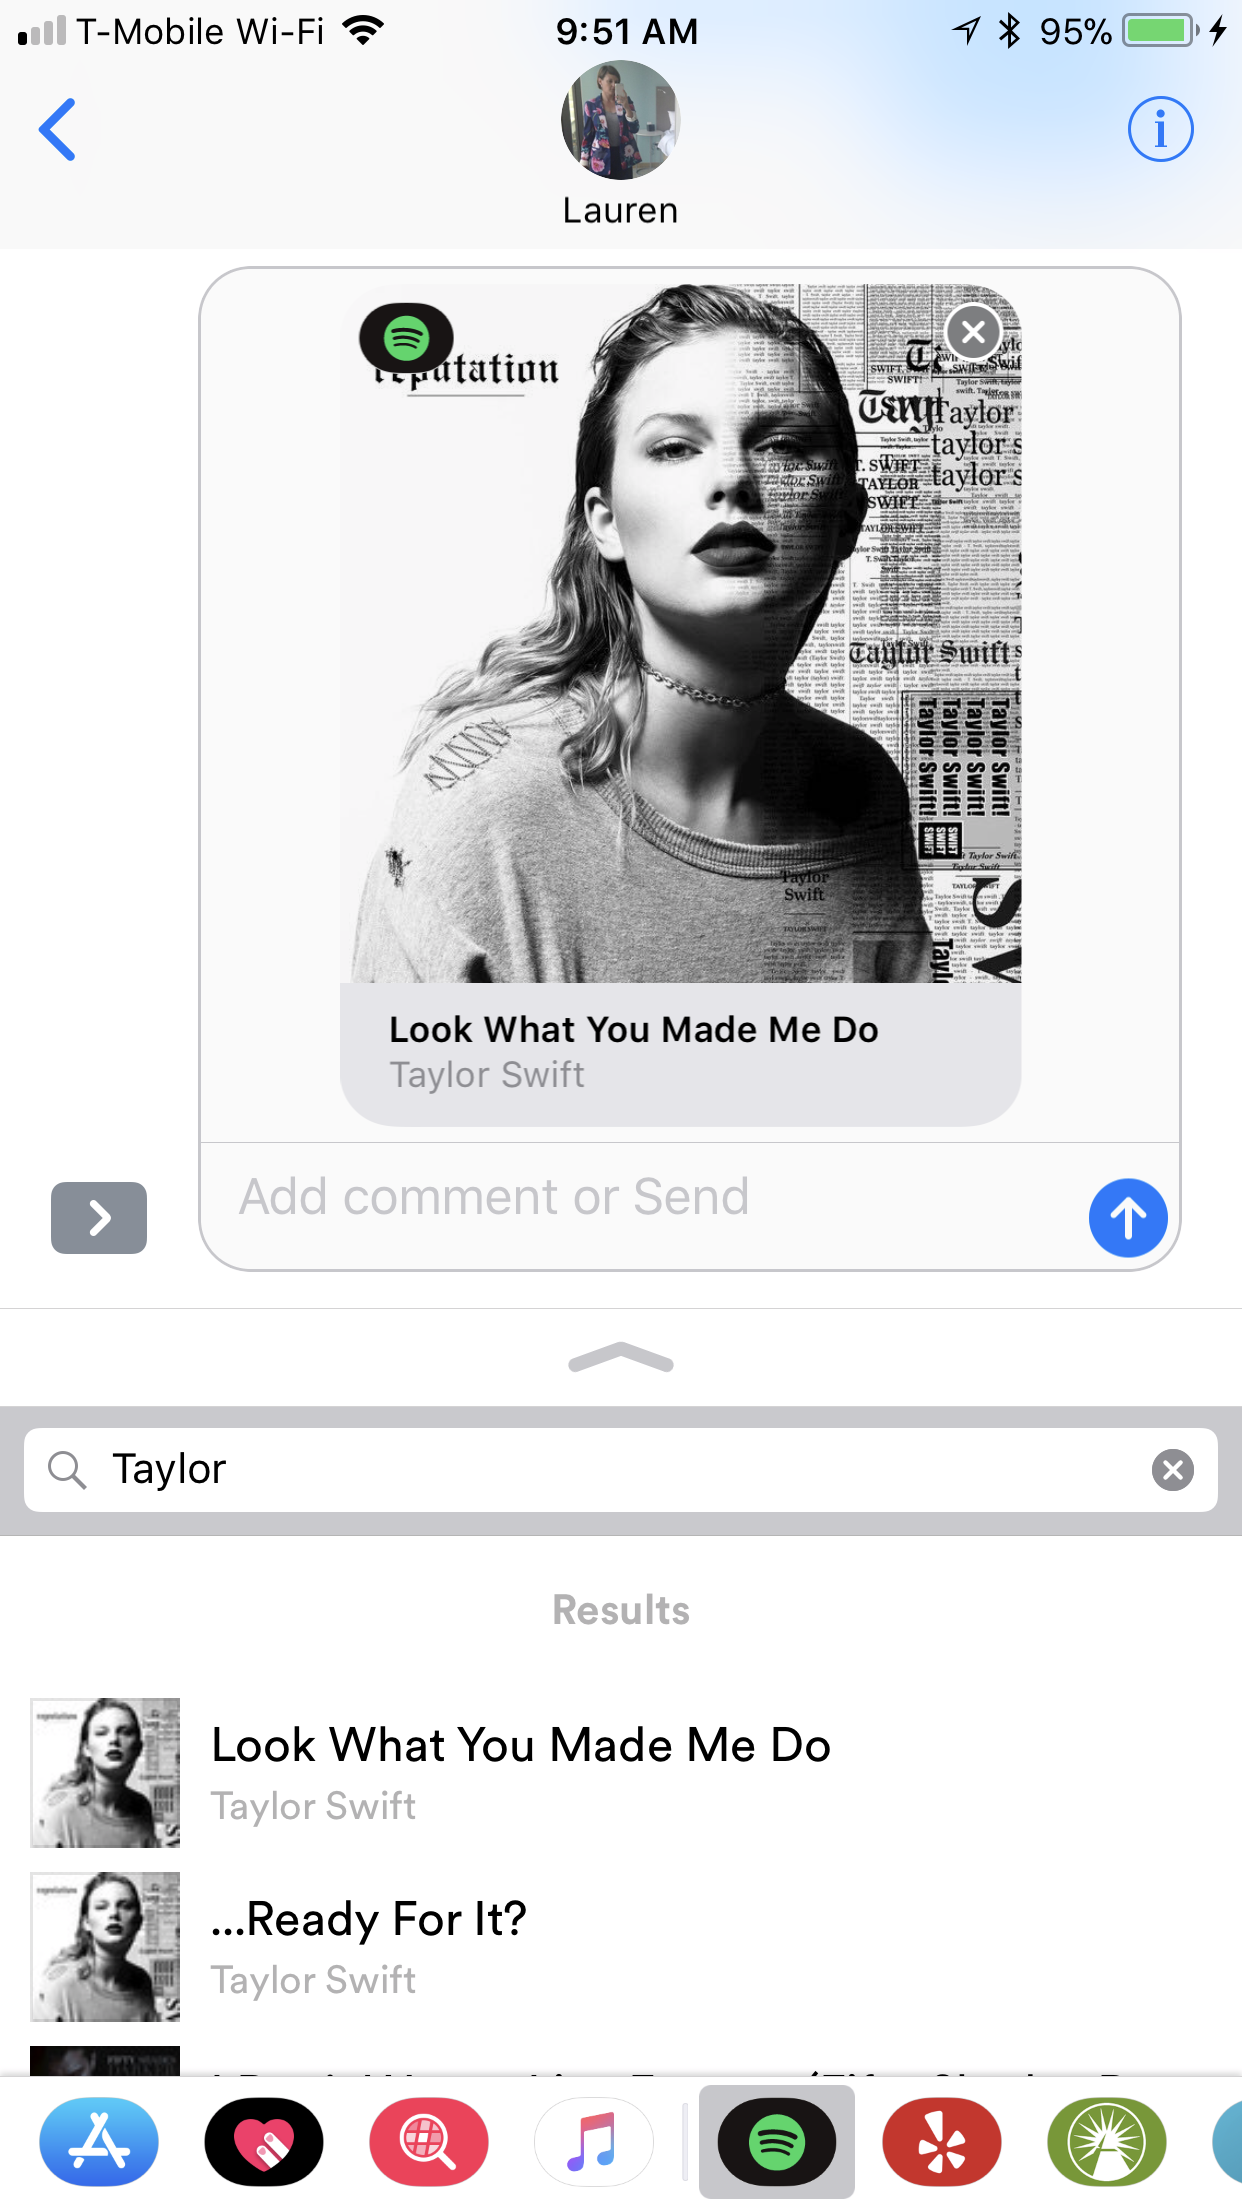 Spotify launches an iMessage app for texting songs to friends